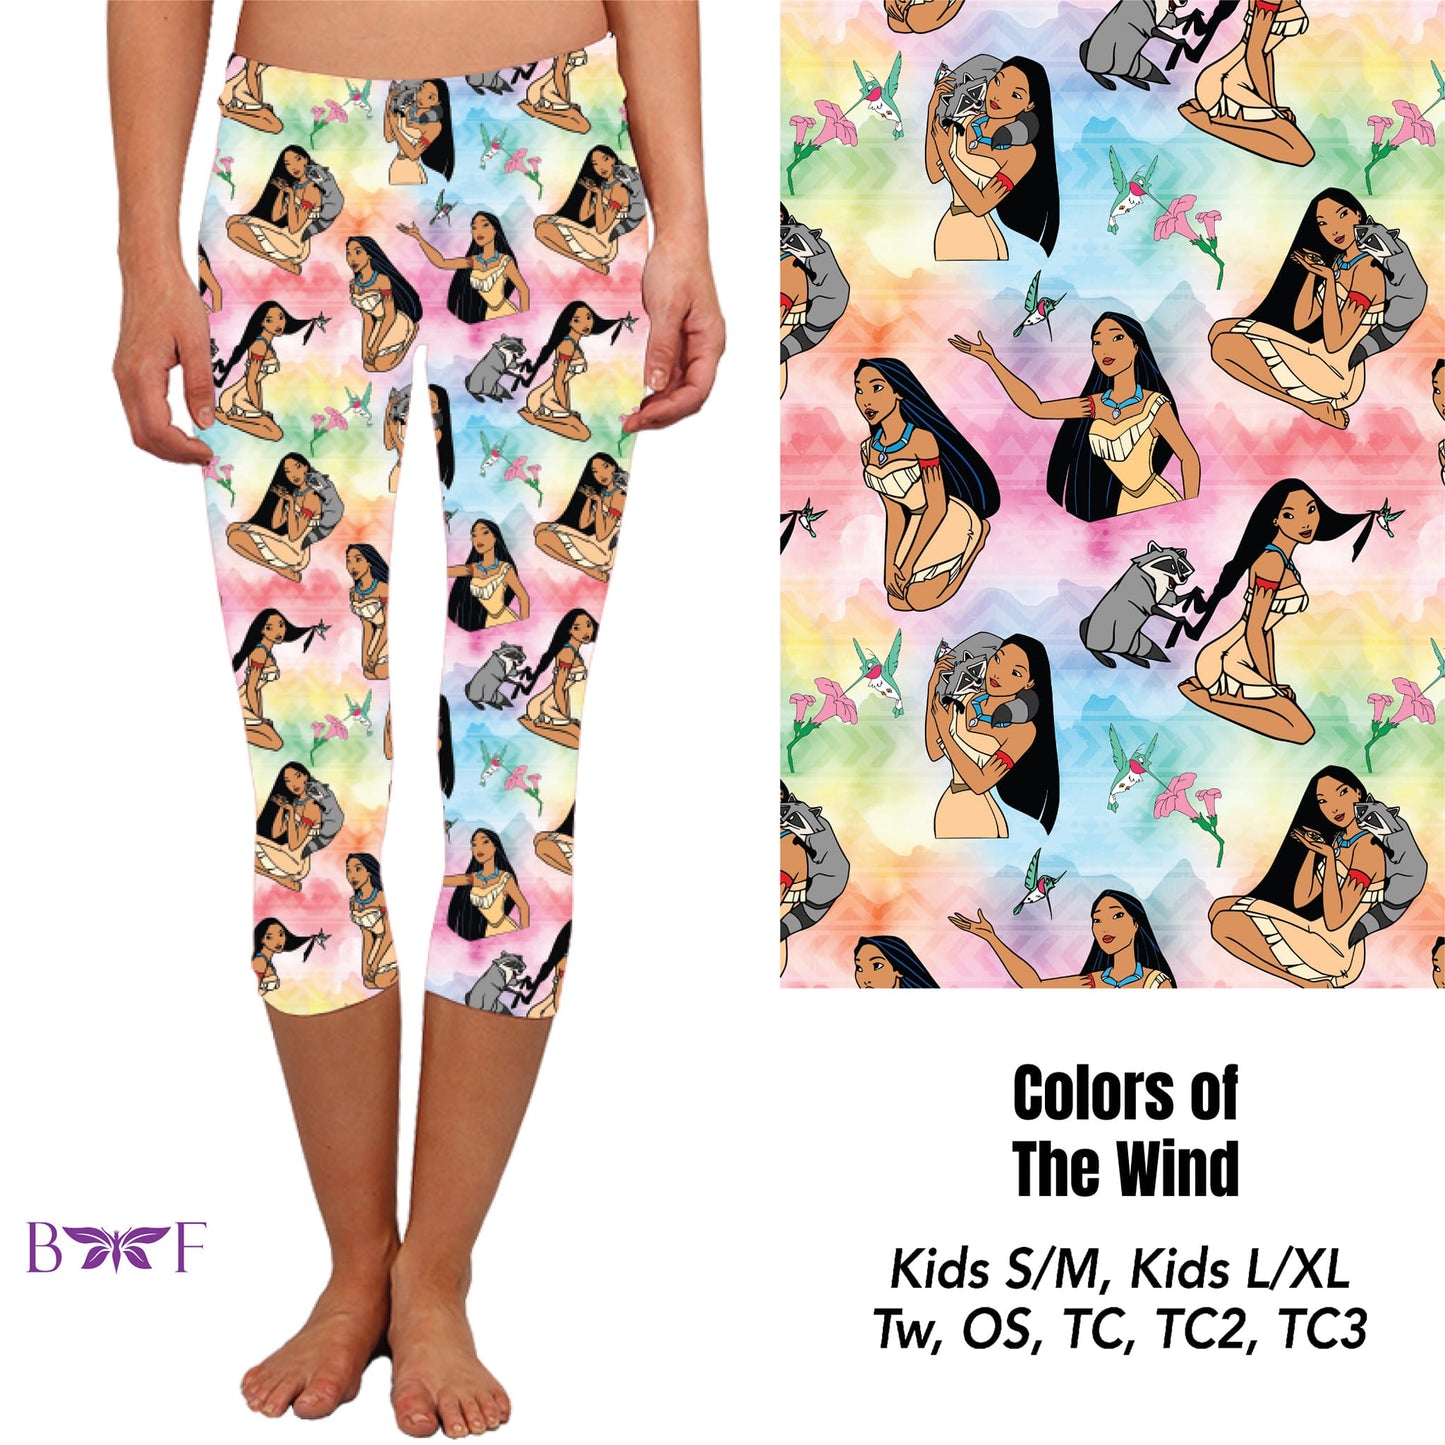 Colors of The Wind kids leggings with pockets